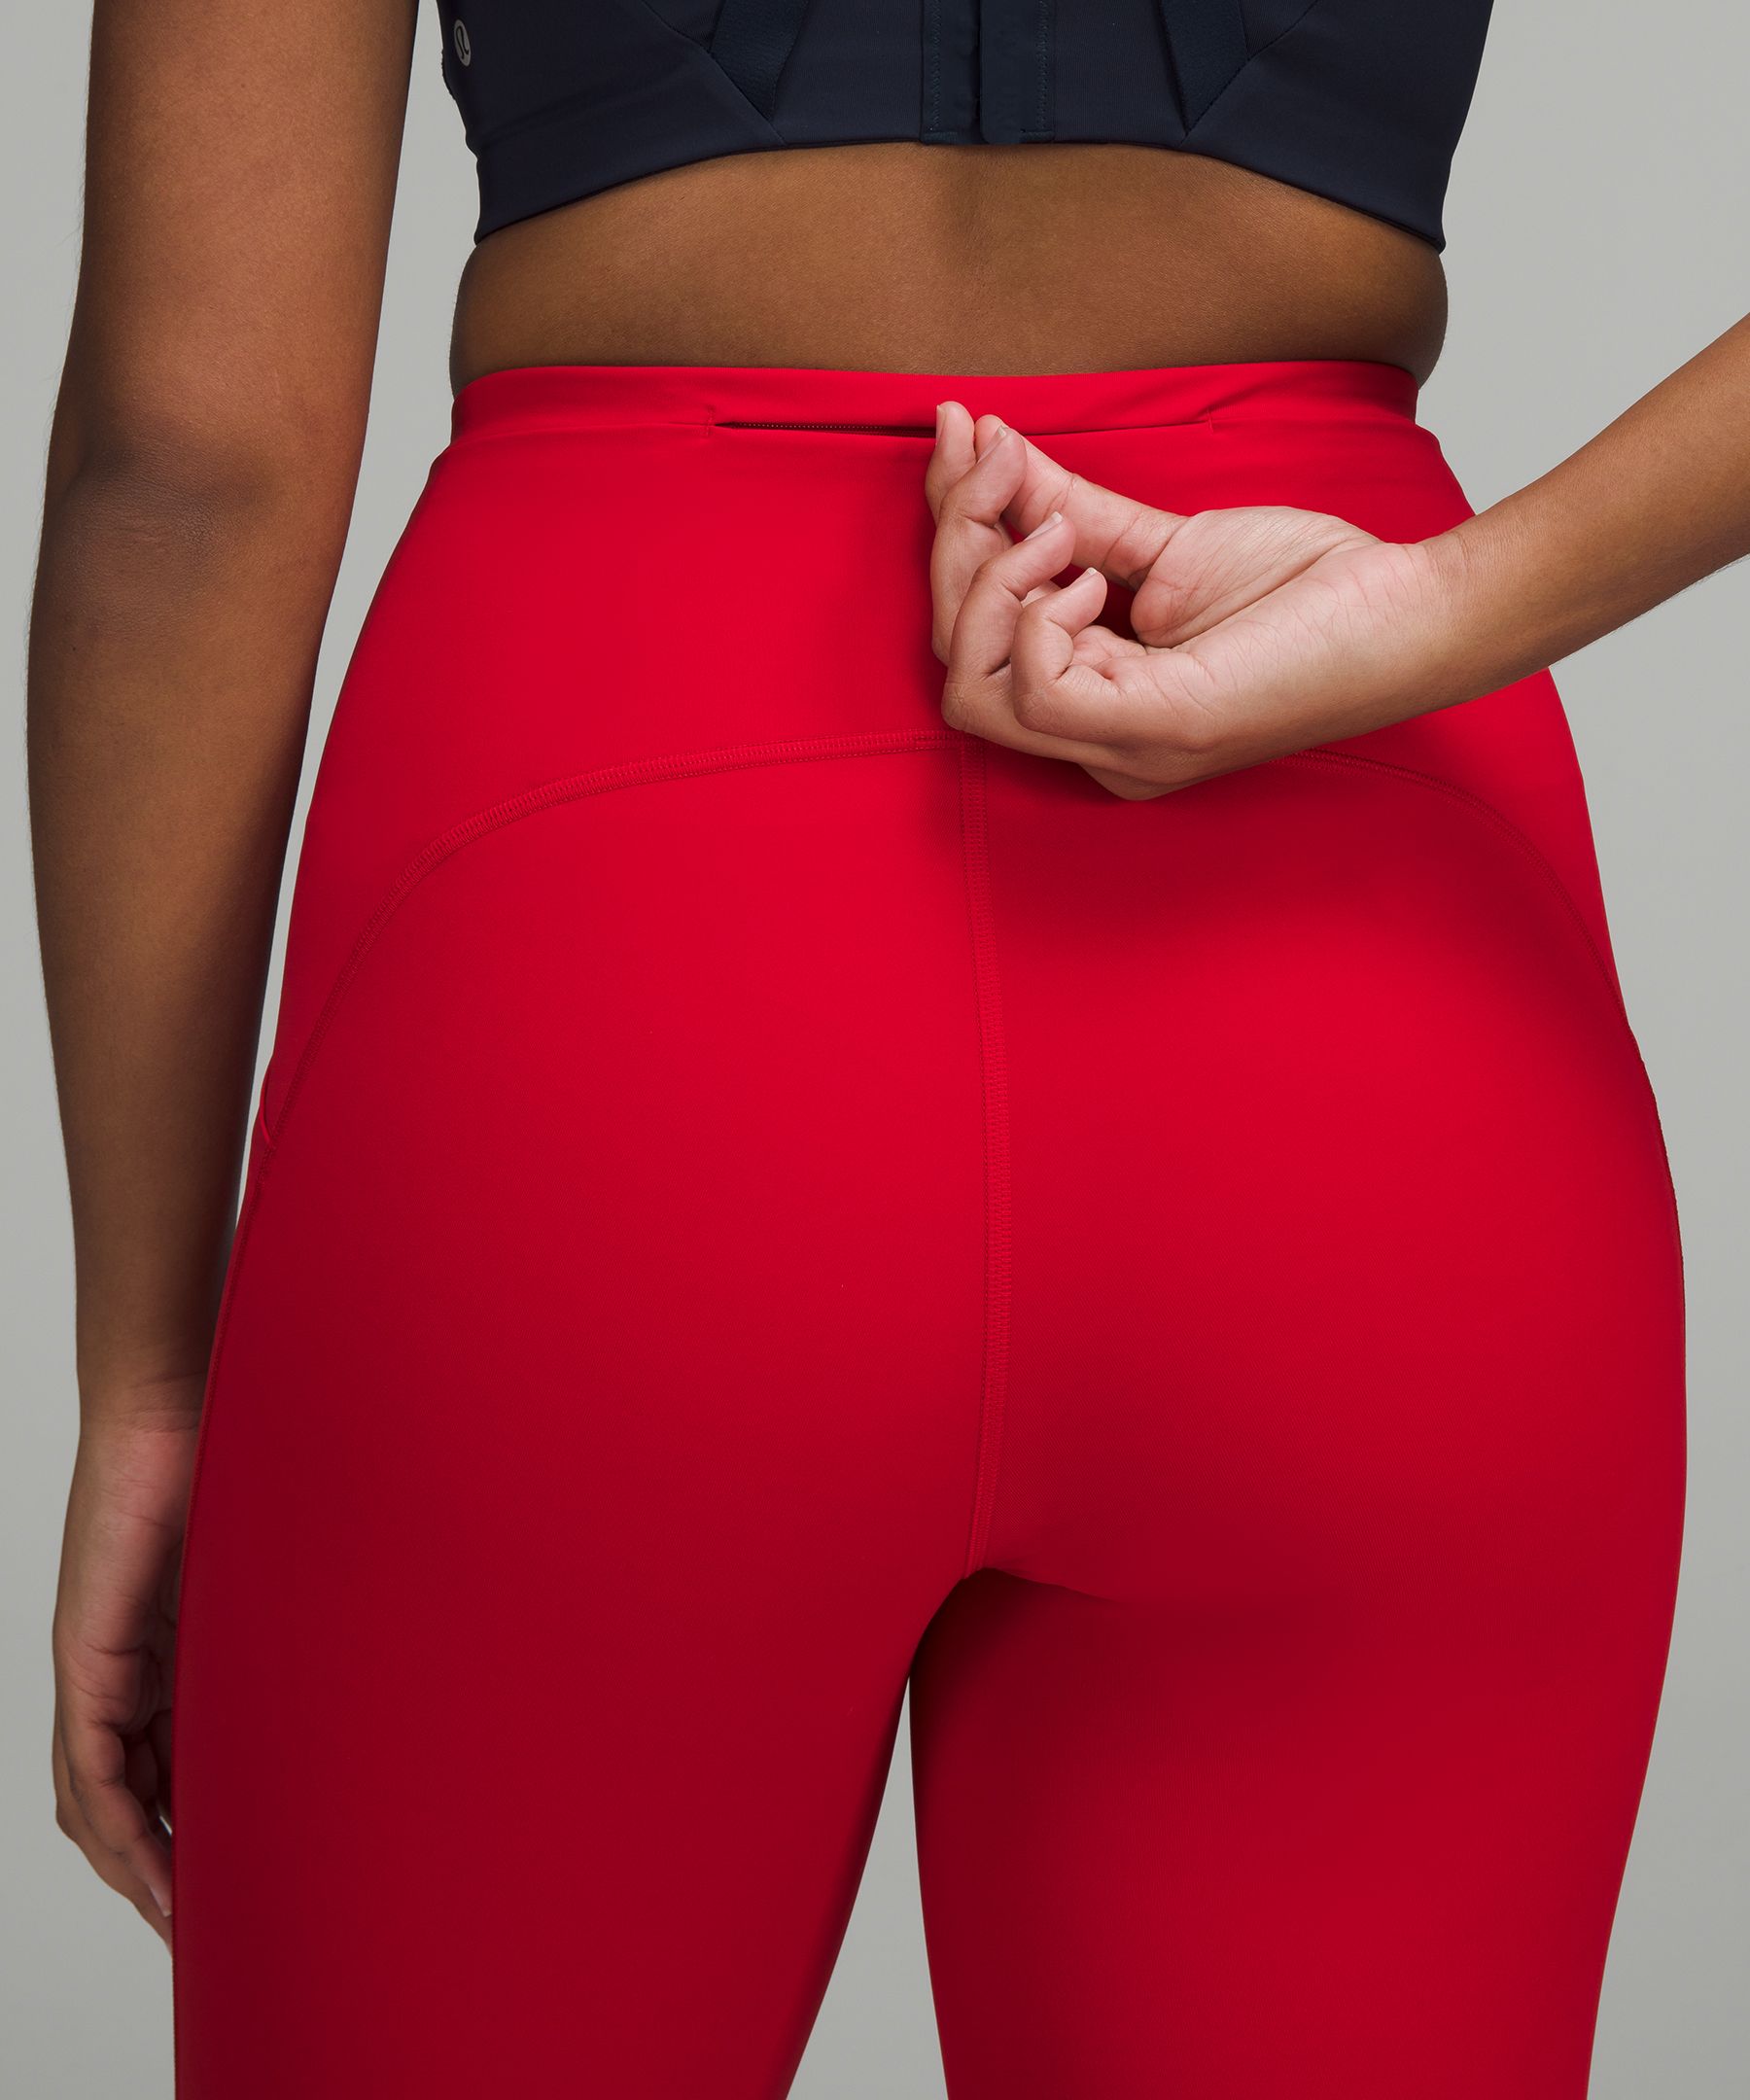 Forrest Chase - All 👏 about 👏 those 👏 pockets 👏 The lululemon Swift  Speed Tights are powered by Luxtreme™ fabric, with plenty of space to fit  your phone and a hit